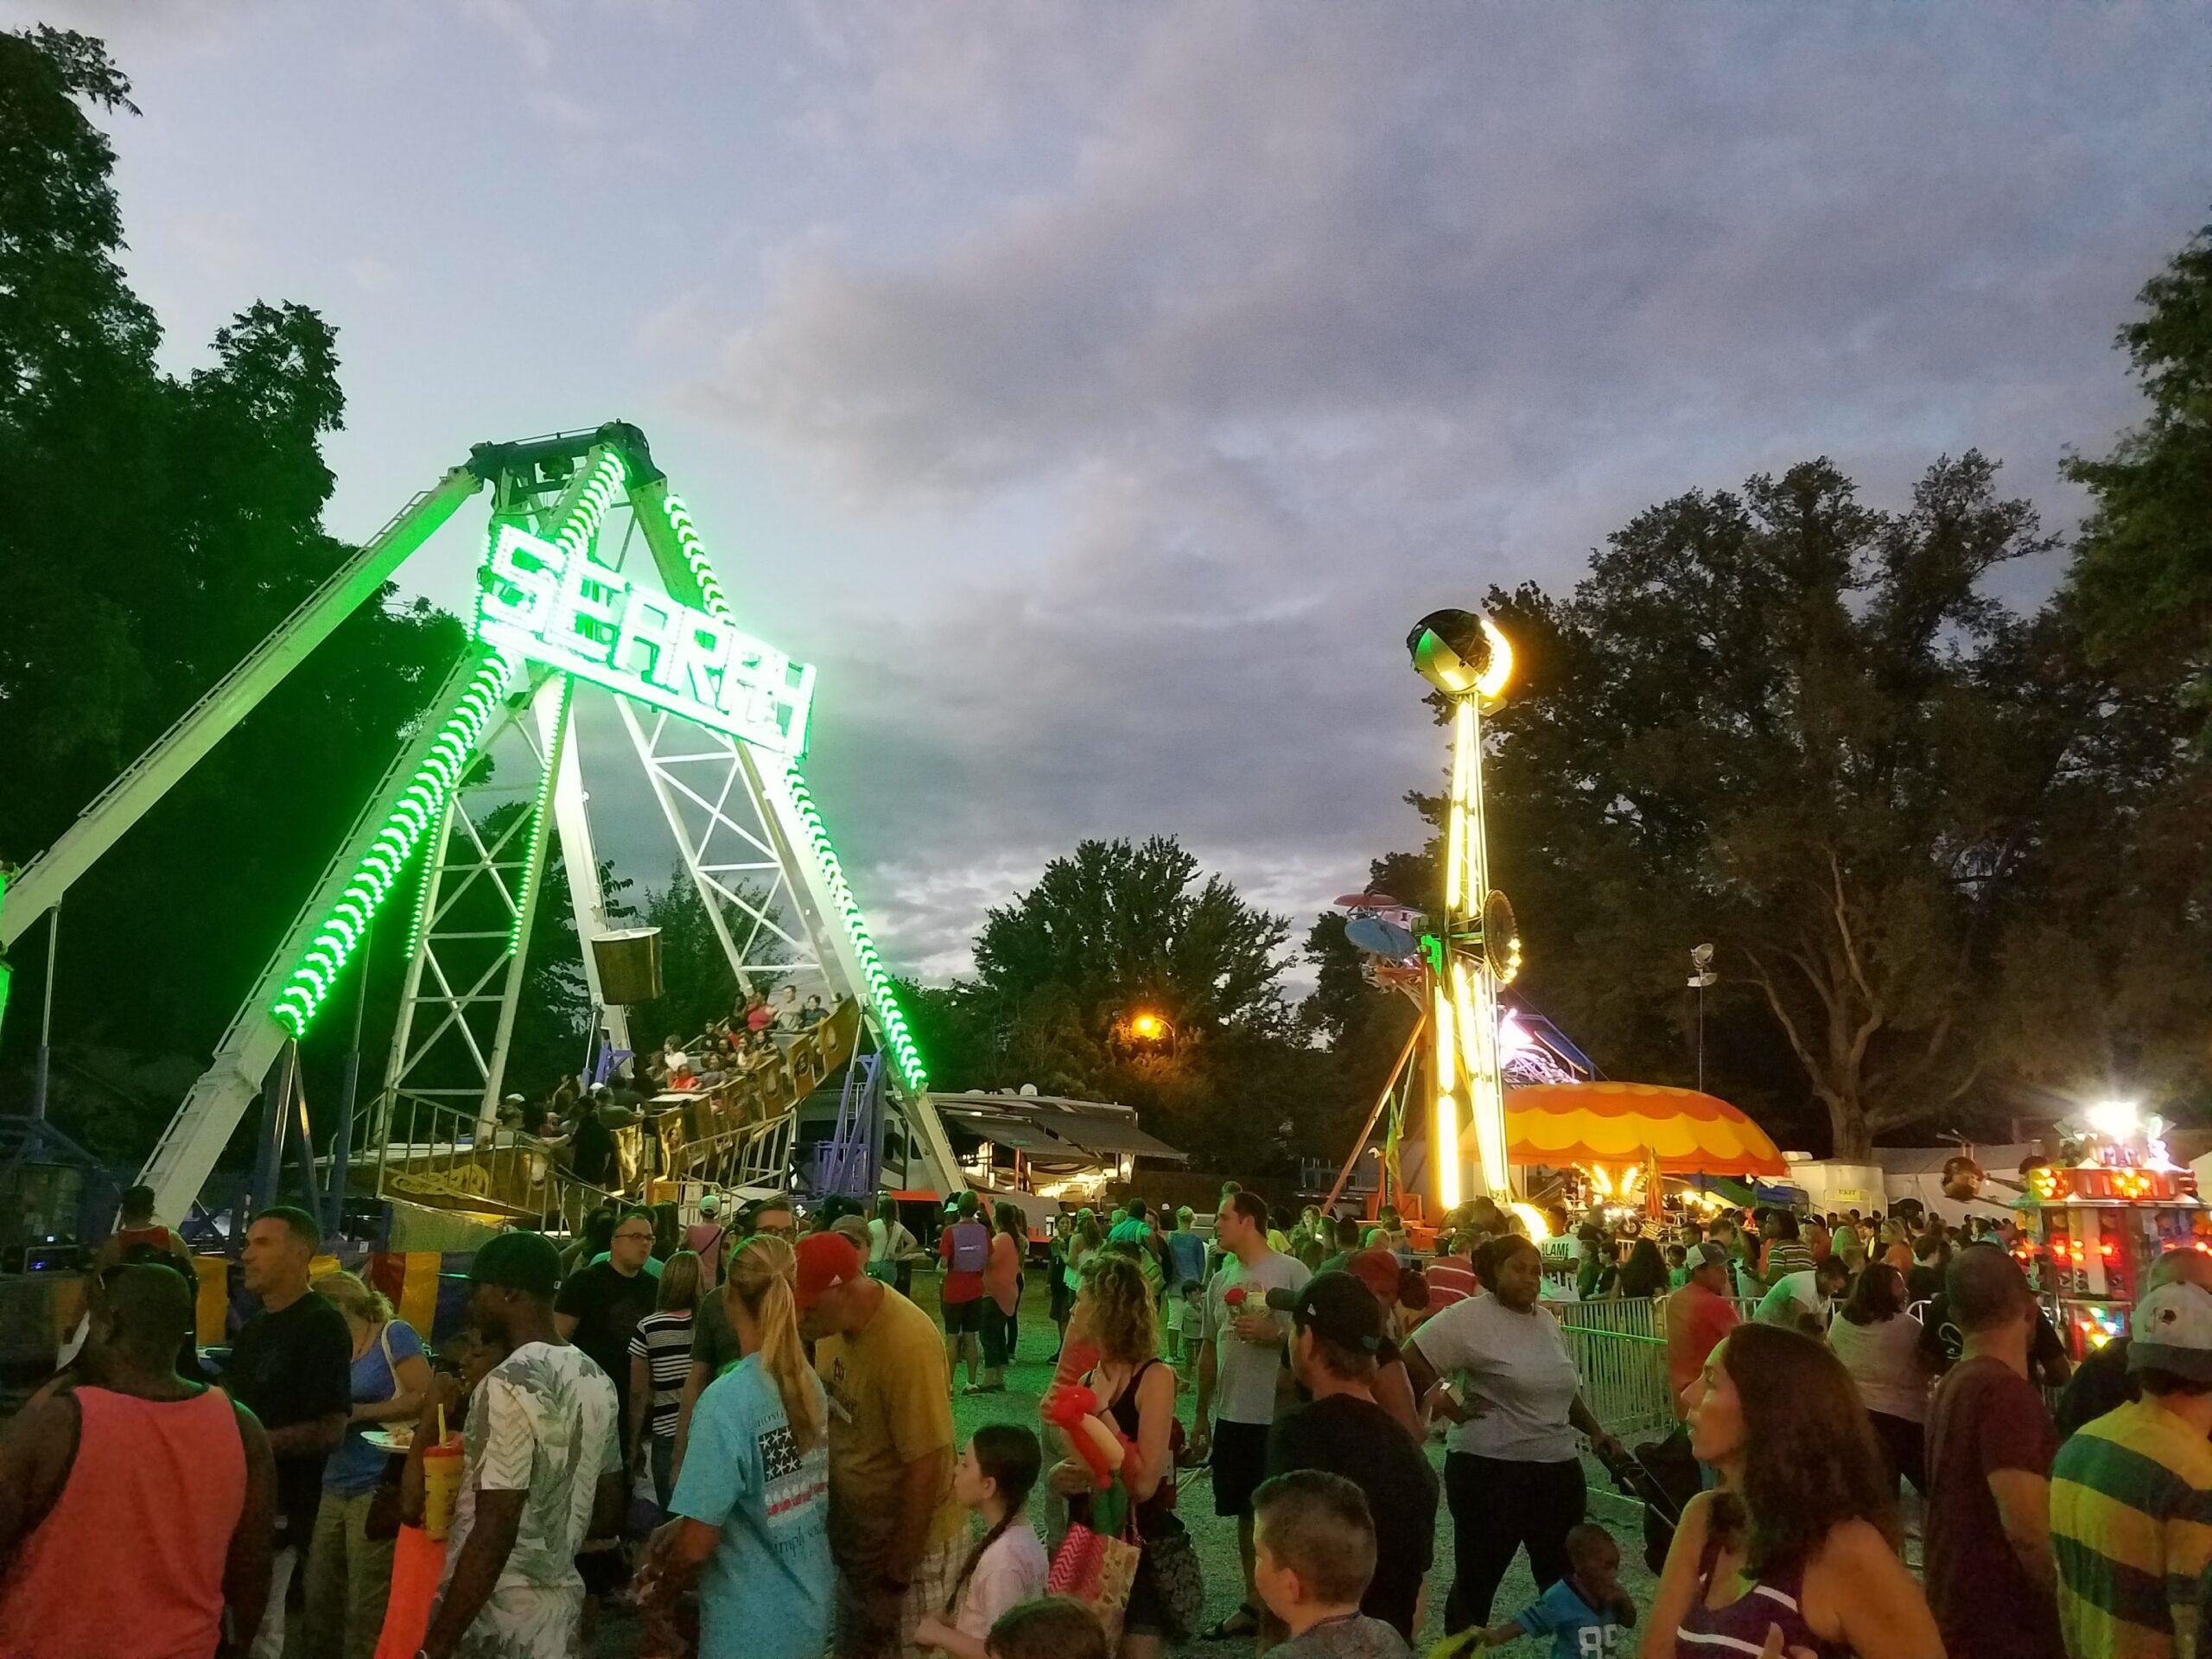 The Matthews Alive carnival rides surrounded by crowds of people.